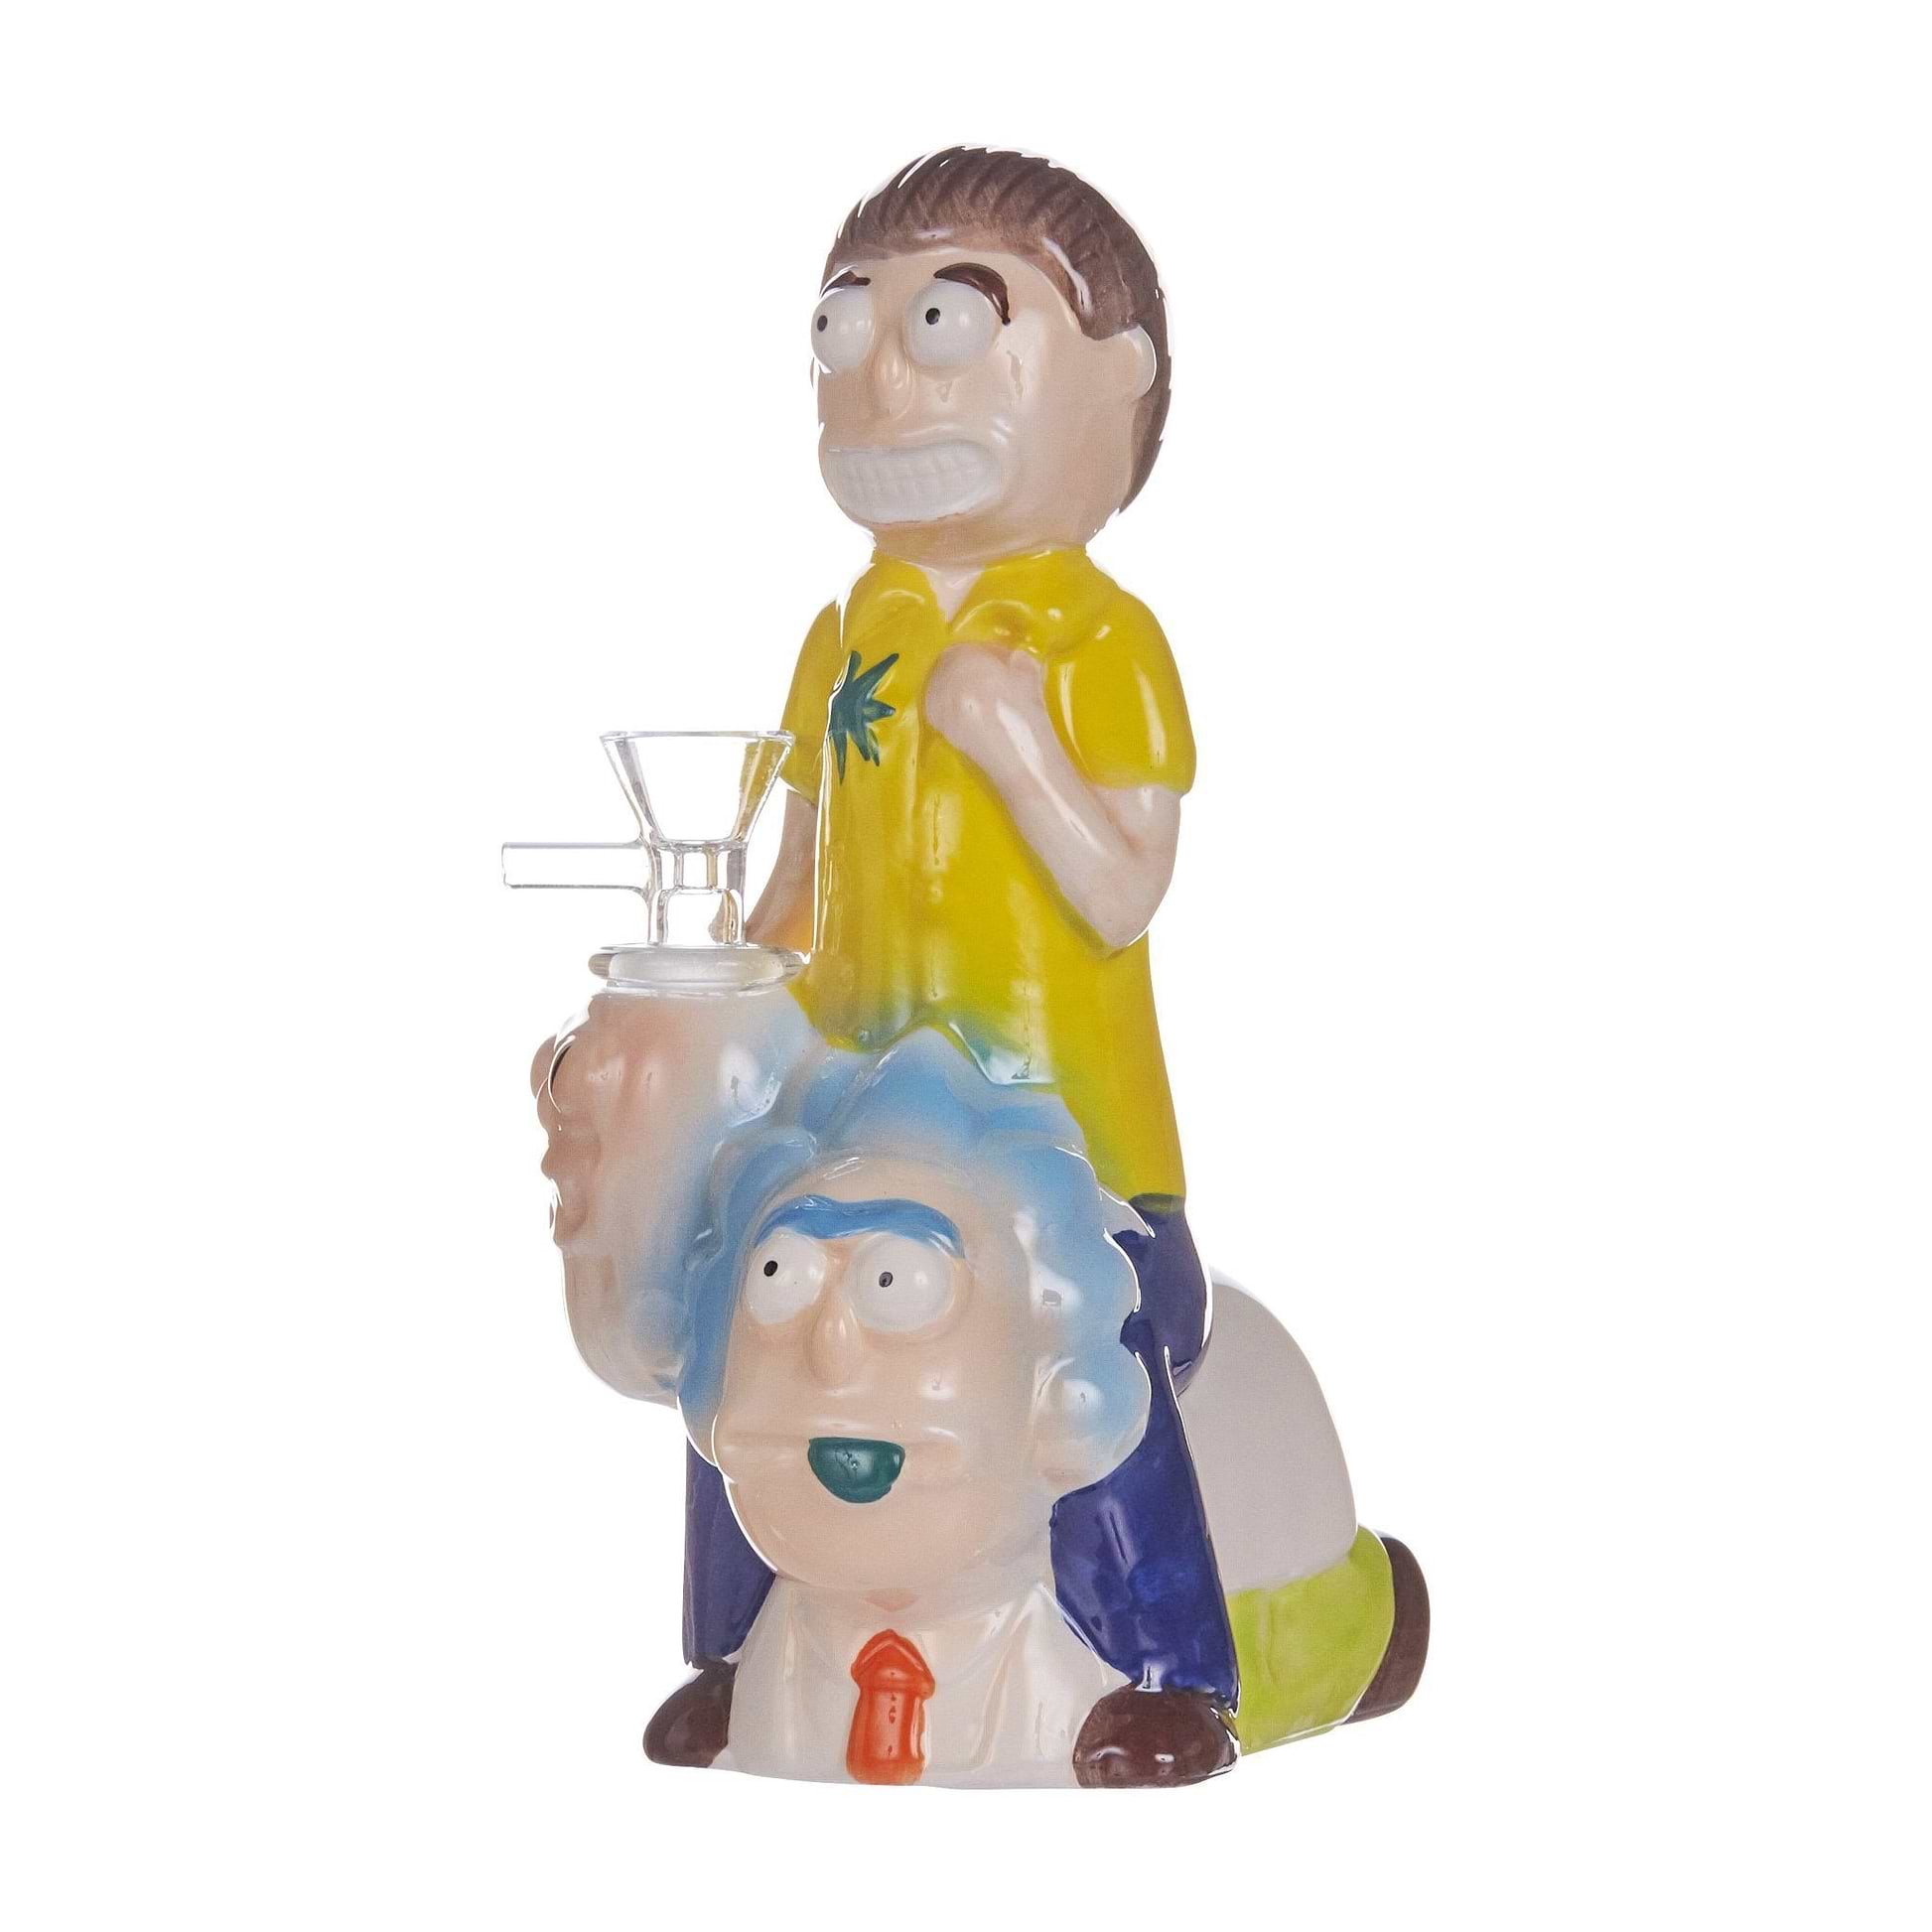 7.5-inch ceramic bong like action figure with funny RnM Morty smoking weed sitting on Rick's shoulder